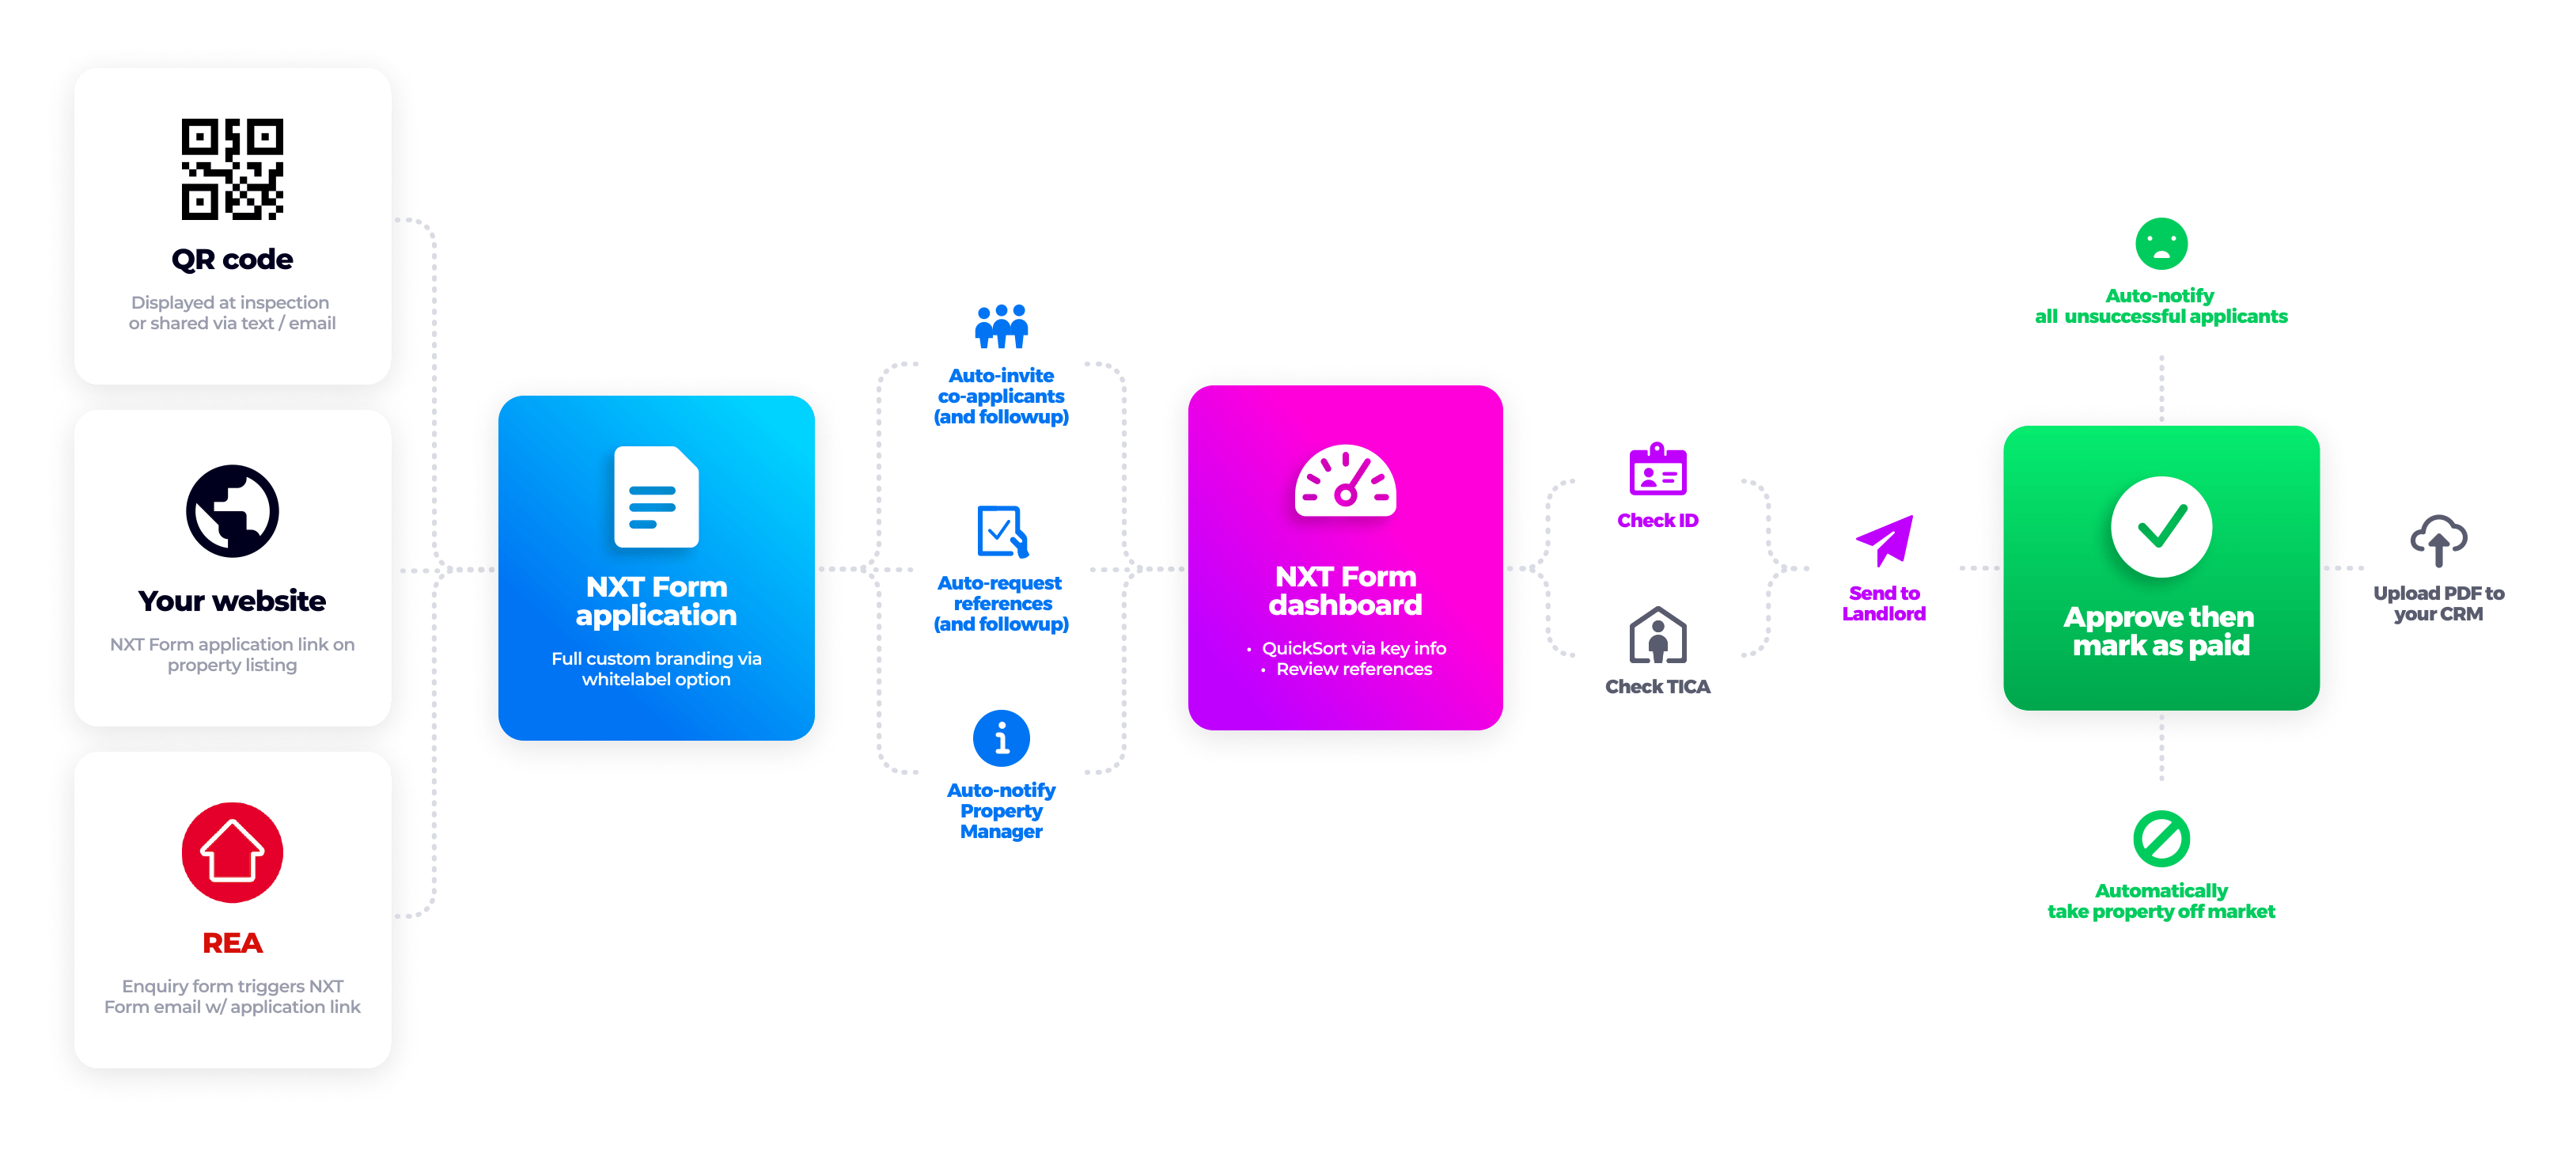 Simplified platform workflow map for NXT Form